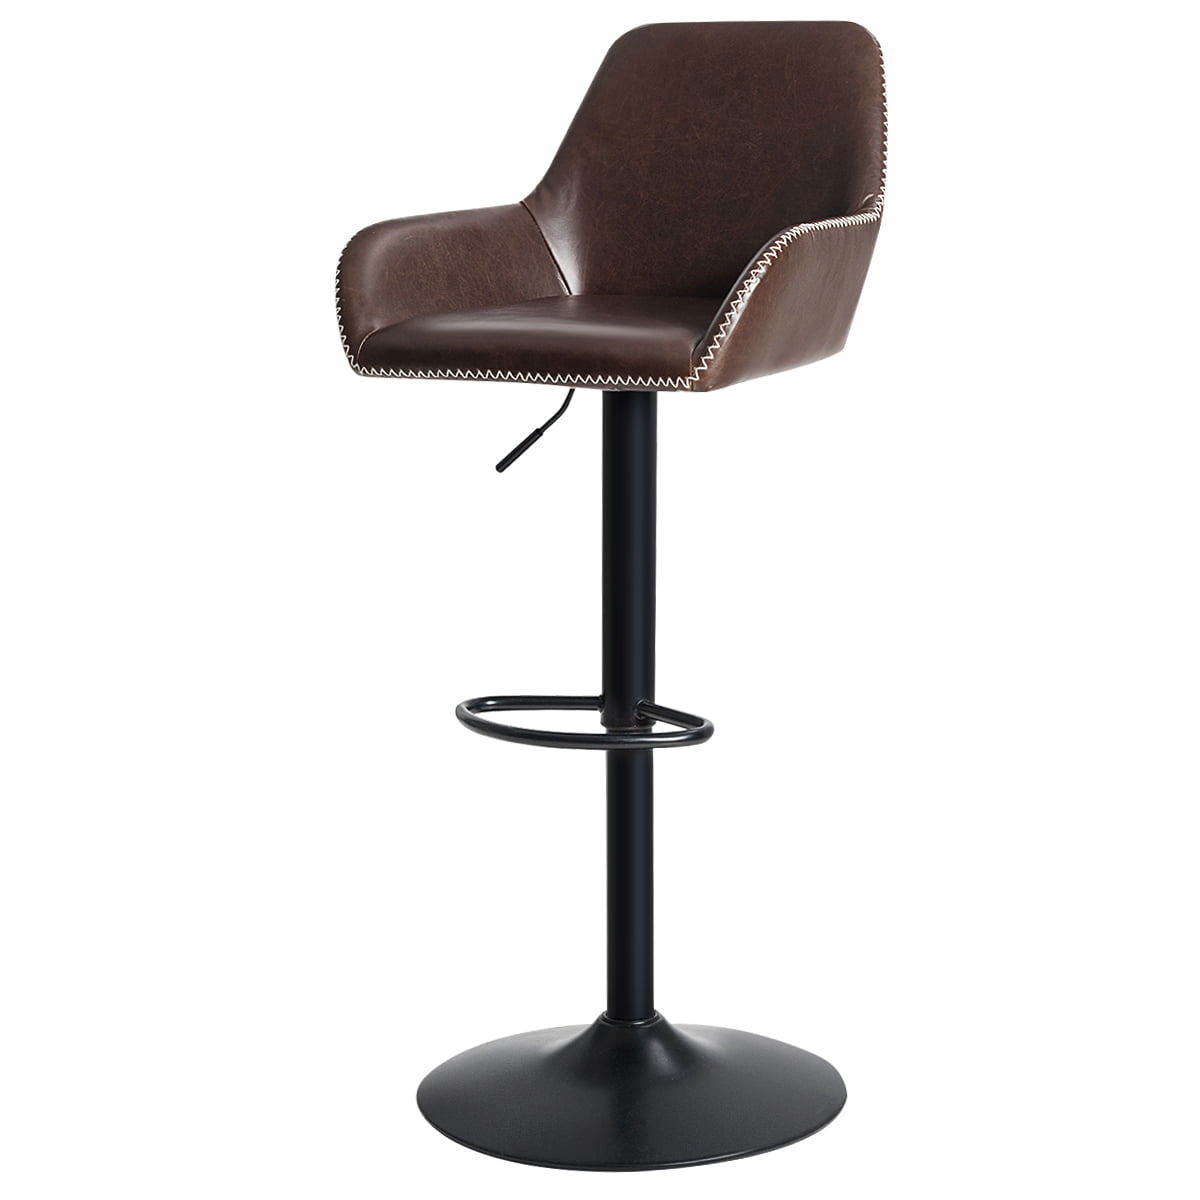 Topbuy Retro Counter Height Bar Stool Swivel Upholstered Chair with